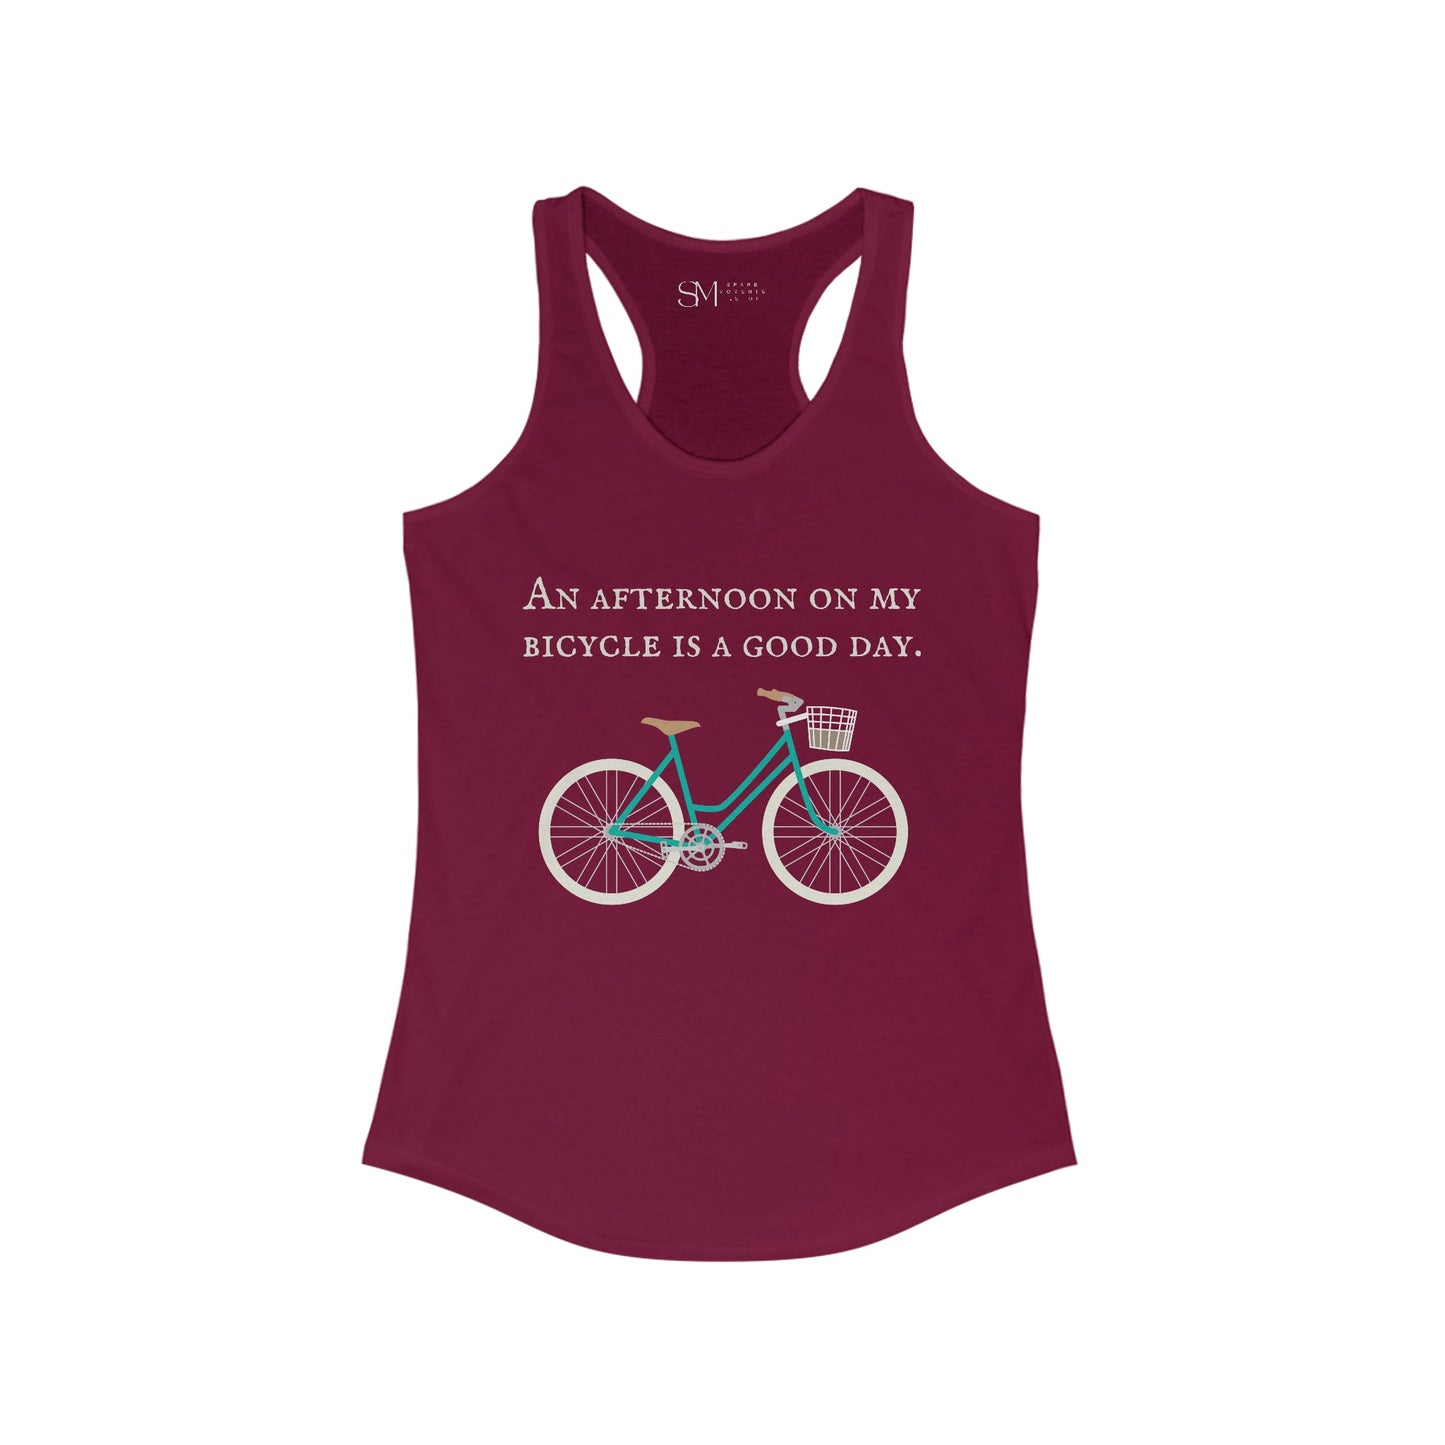 Bicycle Tank Tops For Women